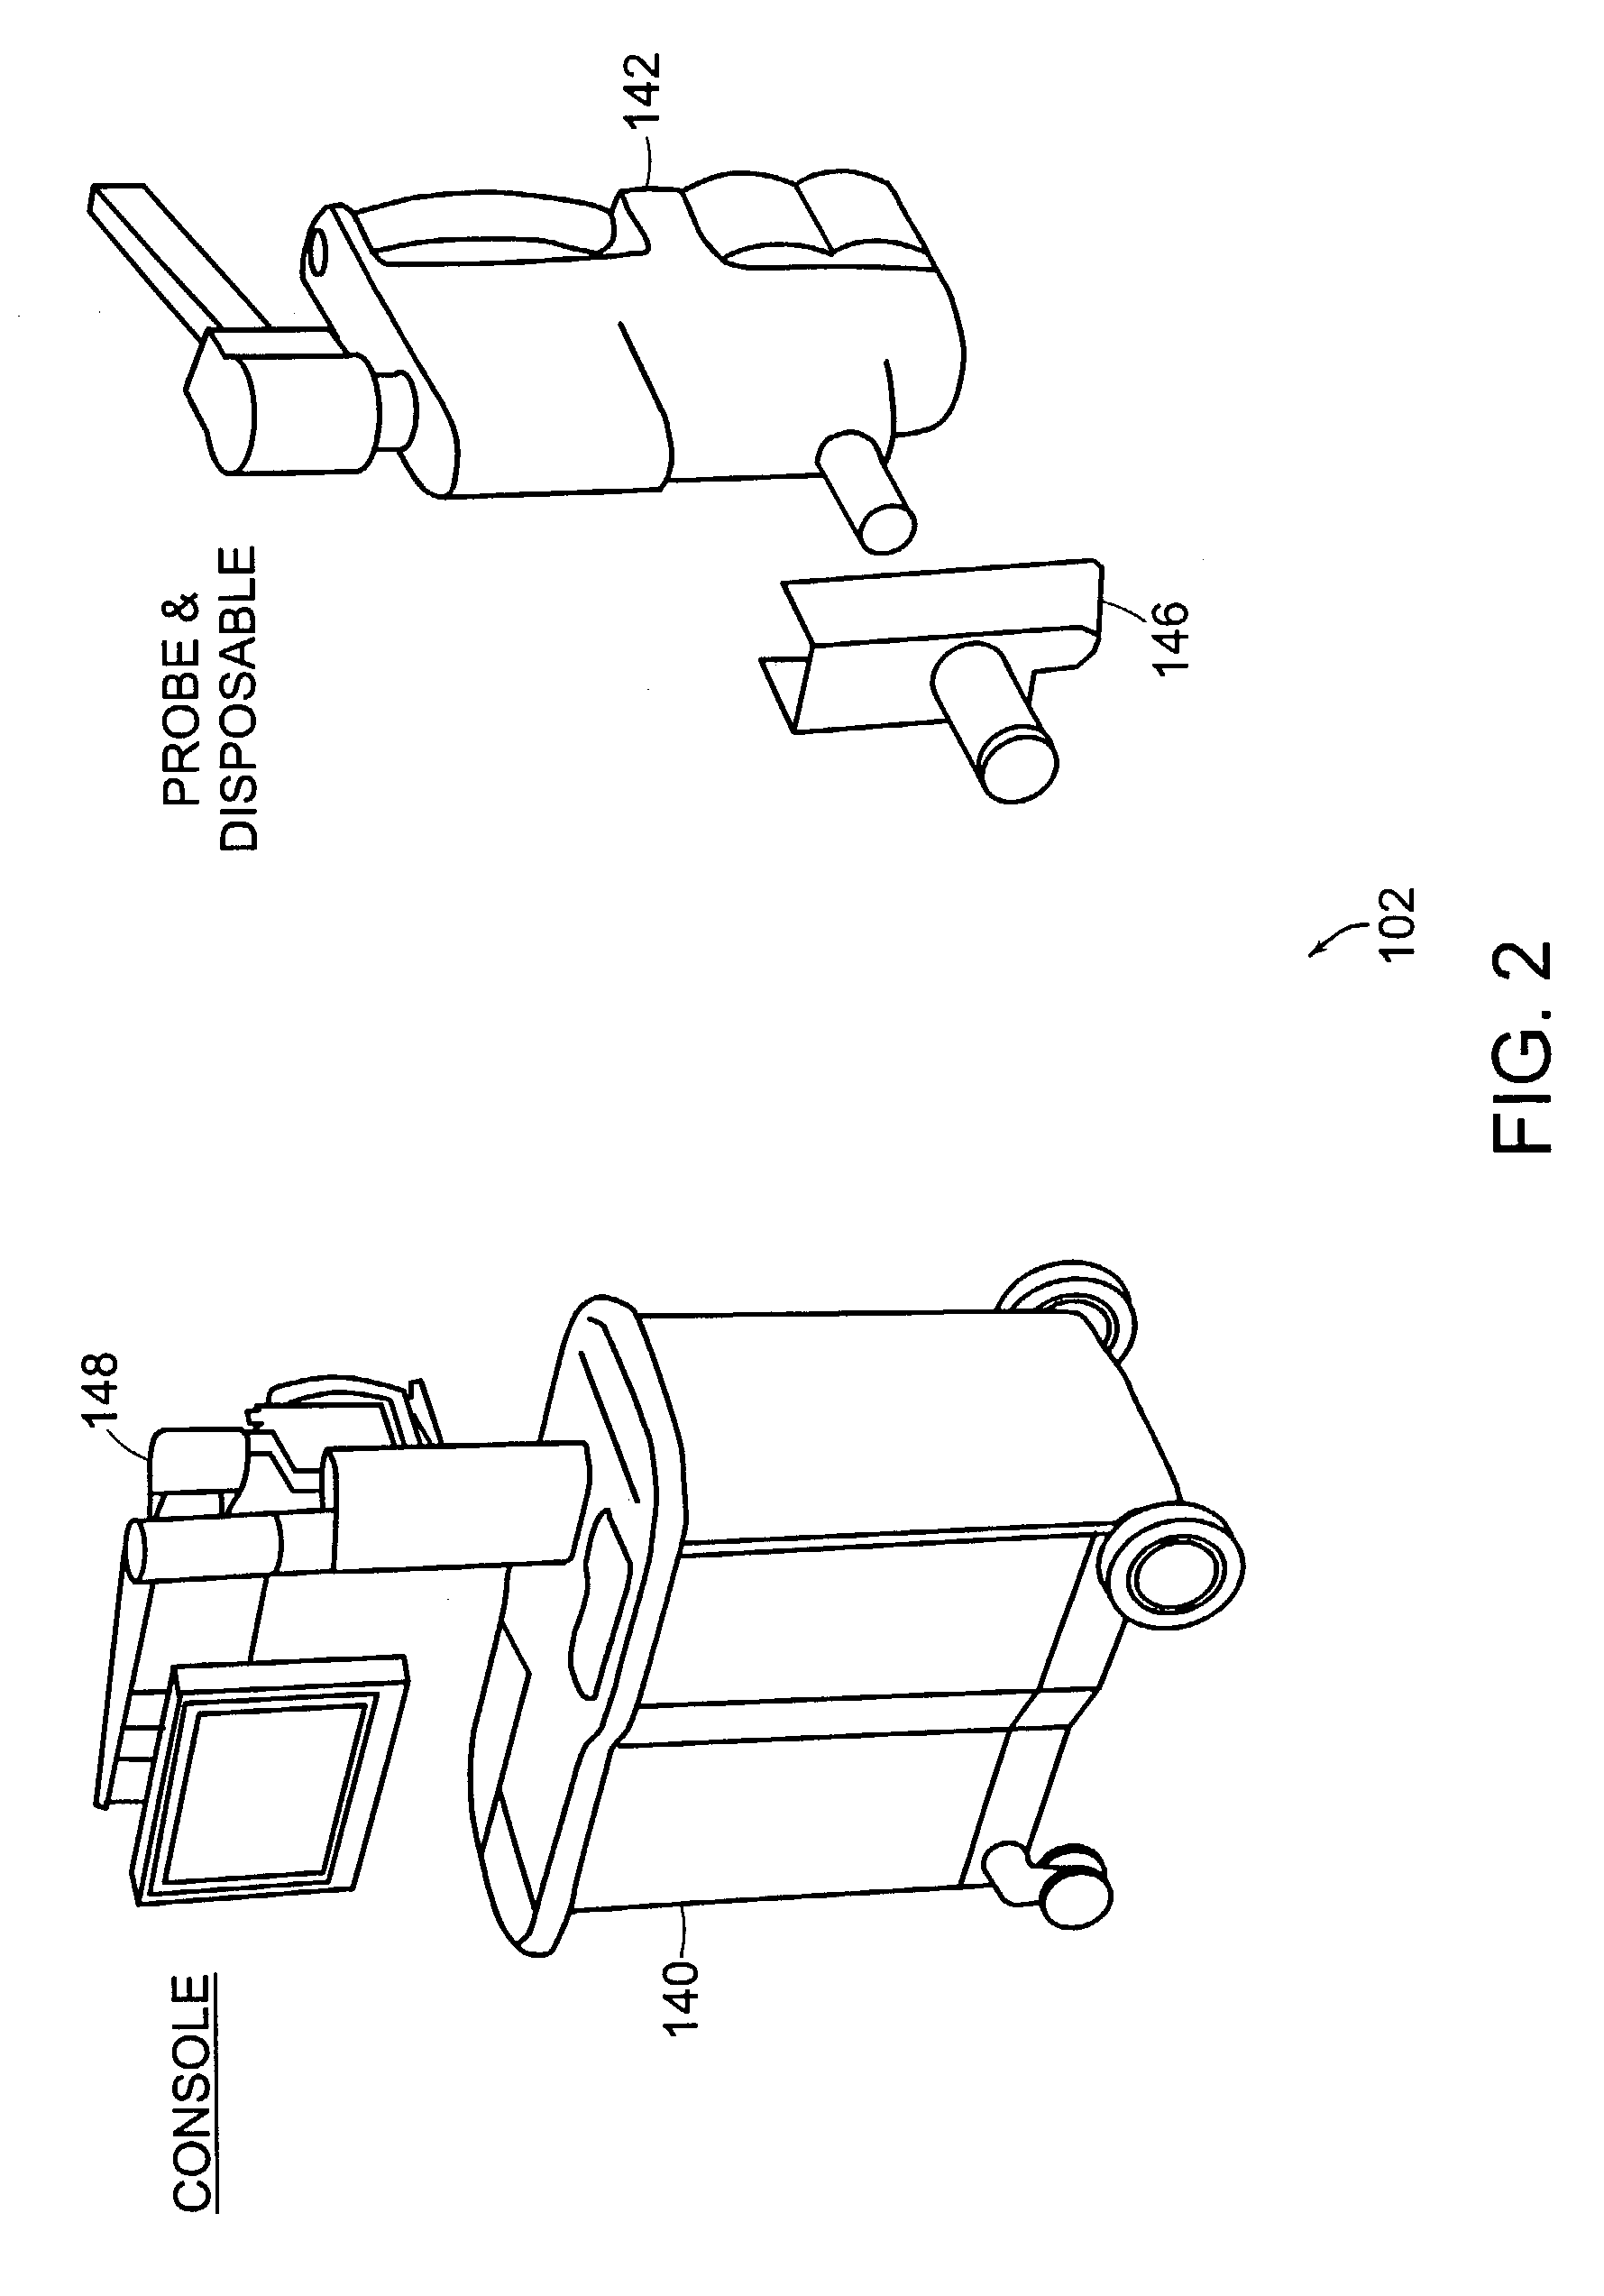 Methods and apparatus for displaying diagnostic data